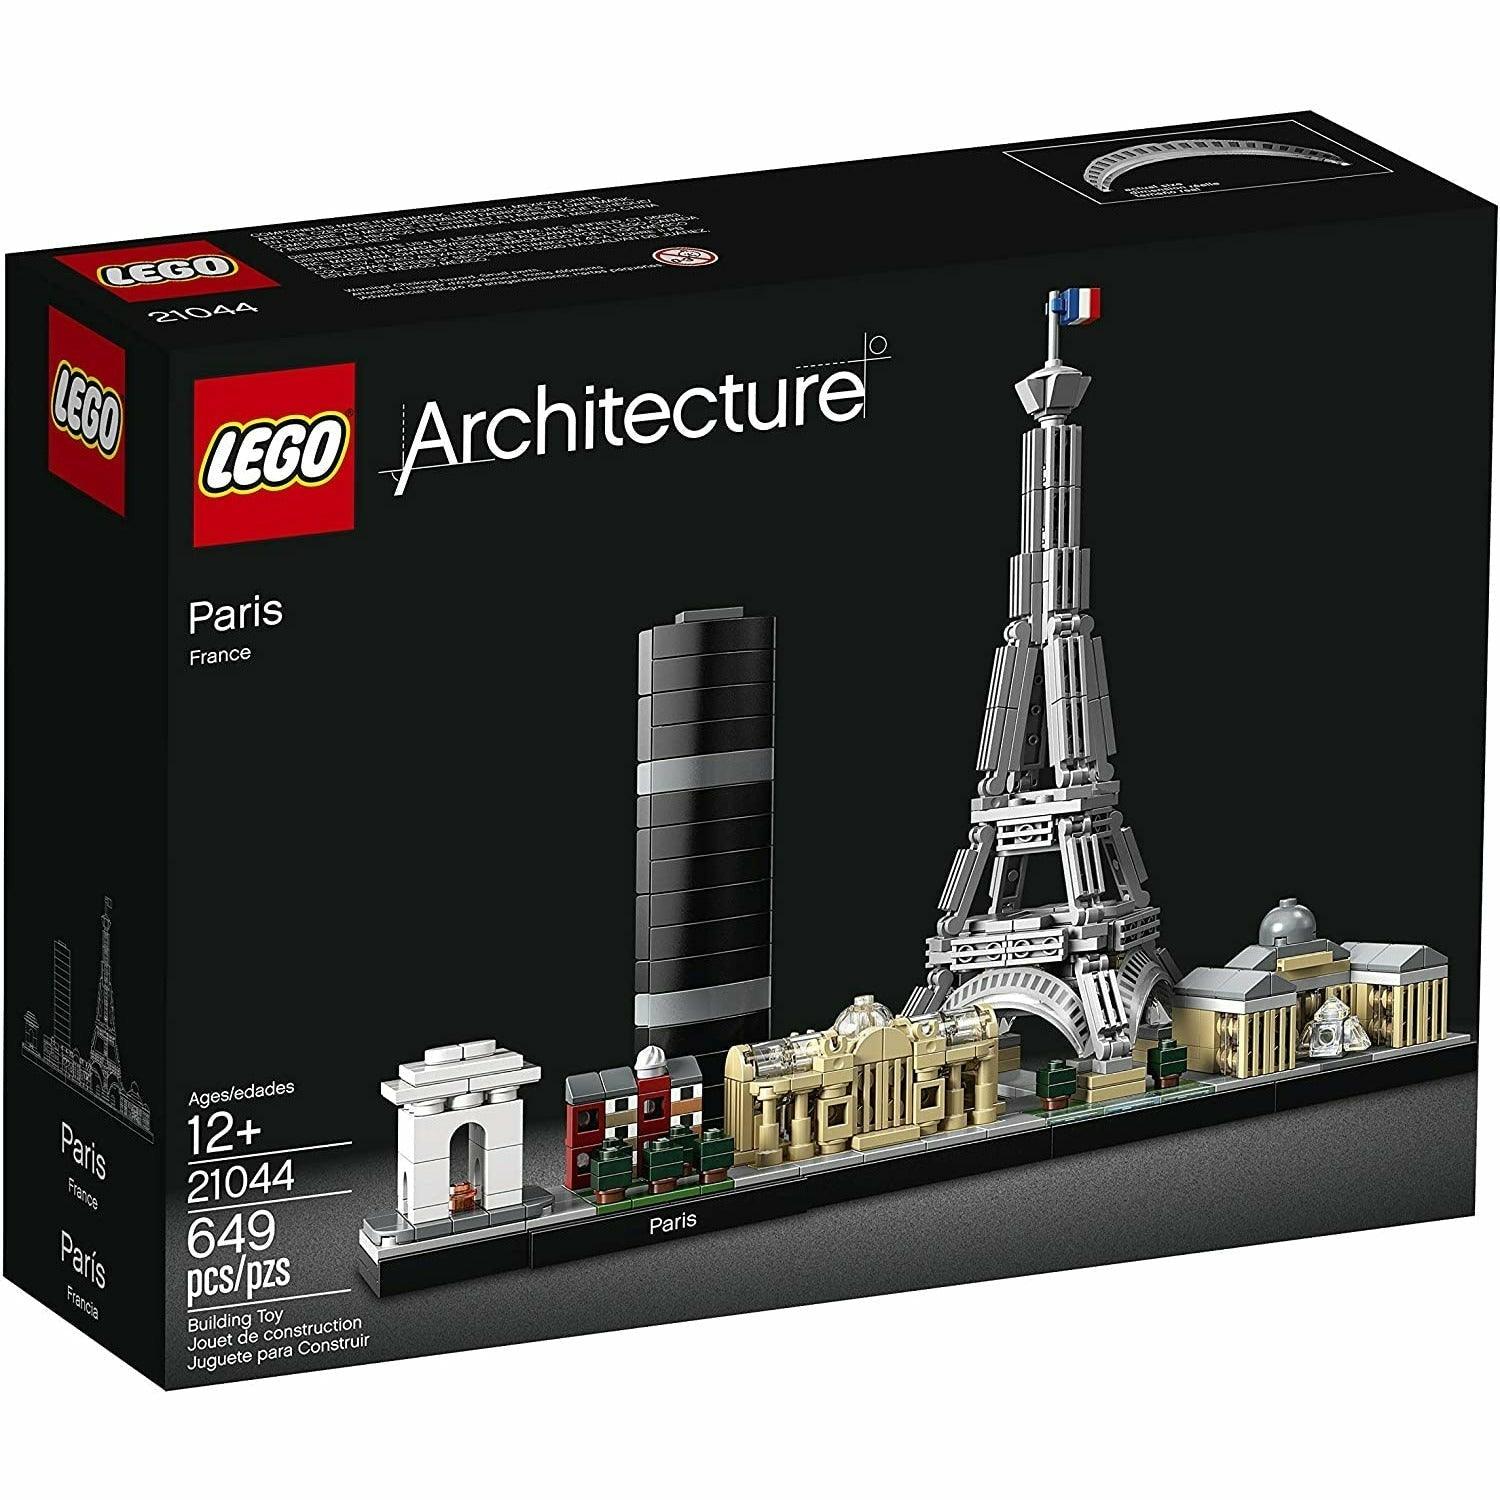 LEGO Architecture Skyline Collection 21044 Paris Skyline Building Kit with Eiffel Tower Model and Other Paris City (649 Pieces) - BumbleToys - 18+, Architecture, Boys, Friends, LEGO, OXE, Pre-Order